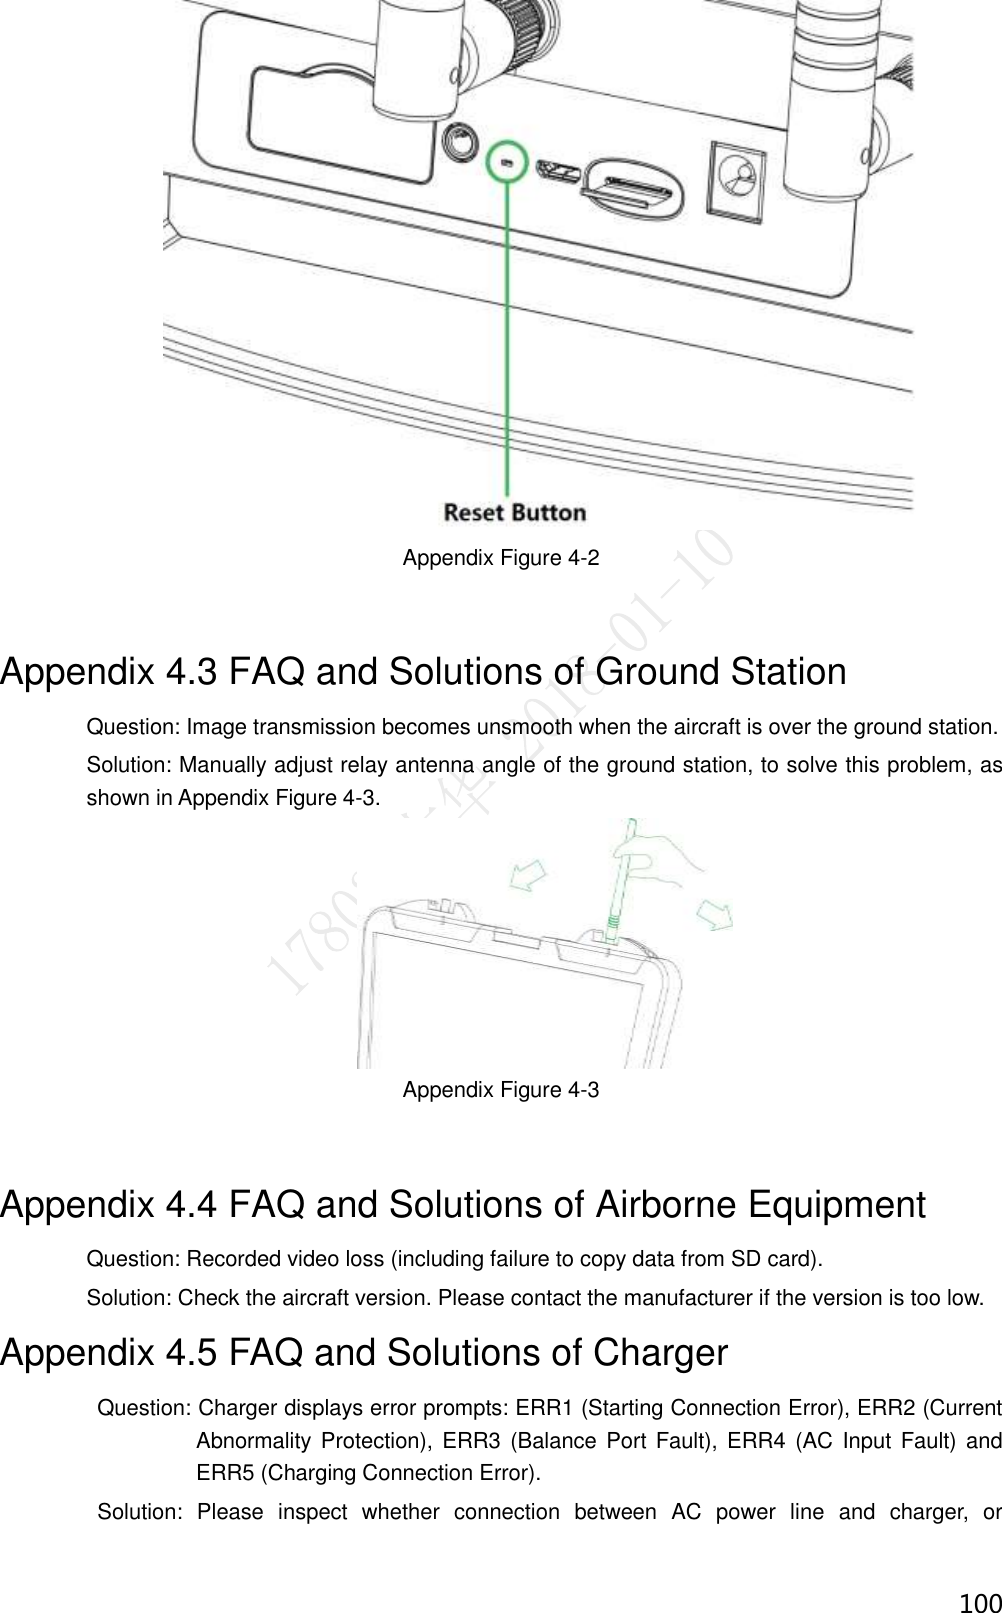  100  Appendix Figure 4-2 Appendix 4.3 FAQ and Solutions of Ground Station Question: Image transmission becomes unsmooth when the aircraft is over the ground station. Solution: Manually adjust relay antenna angle of the ground station, to solve this problem, as shown in Appendix Figure 4-3.  Appendix Figure 4-3 Appendix 4.4 FAQ and Solutions of Airborne Equipment Question: Recorded video loss (including failure to copy data from SD card). Solution: Check the aircraft version. Please contact the manufacturer if the version is too low. Appendix 4.5 FAQ and Solutions of Charger                   Question: Charger displays error prompts: ERR1 (Starting Connection Error), ERR2 (Current Abnormality  Protection), ERR3 (Balance Port Fault), ERR4  (AC Input Fault) and ERR5 (Charging Connection Error).                   Solution:  Please  inspect  whether  connection  between  AC  power  line  and  charger,  or 